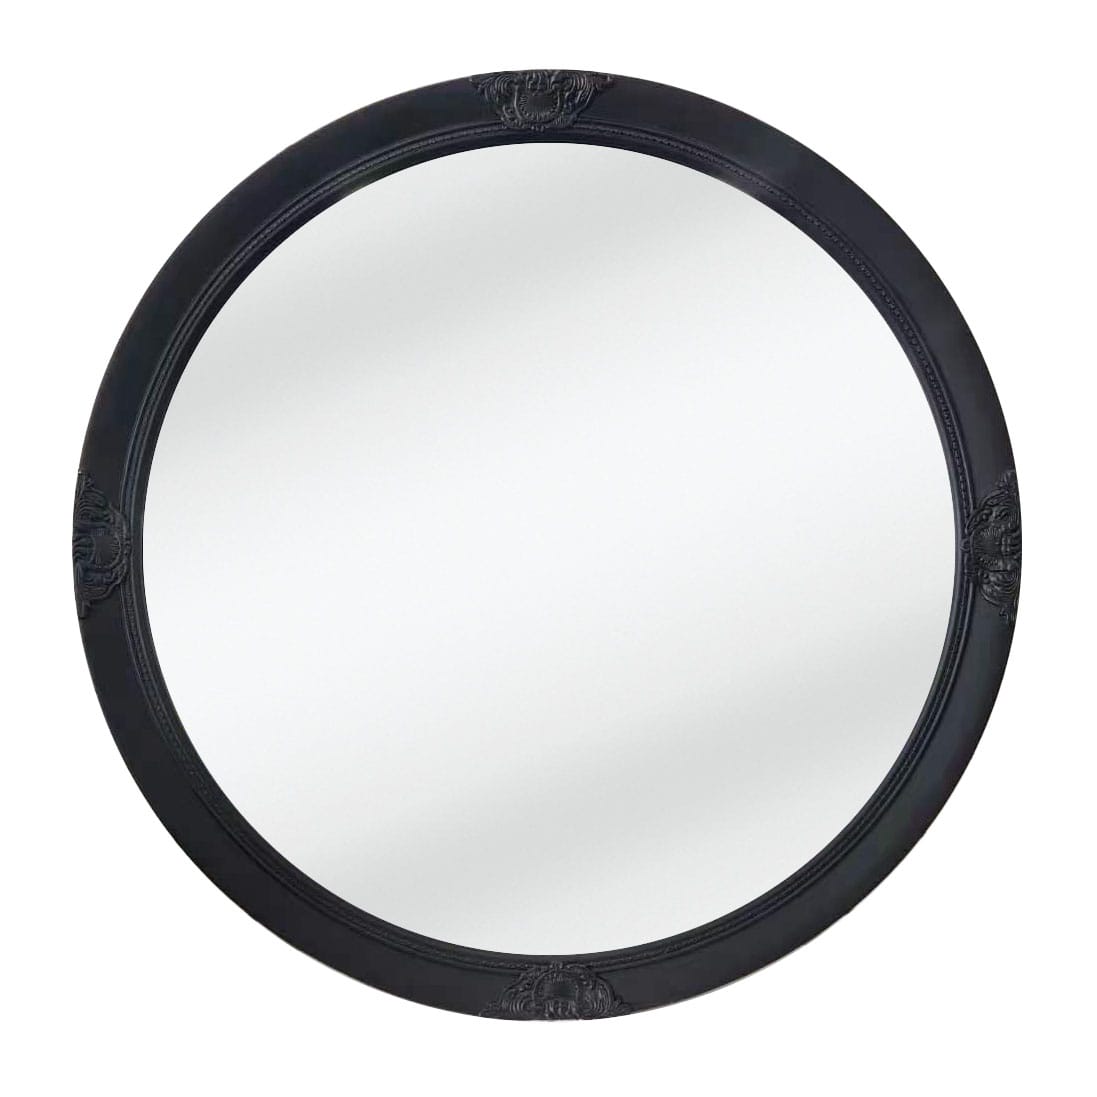 CLEARANCE - French Provincial Ornate Round Mirror - Black